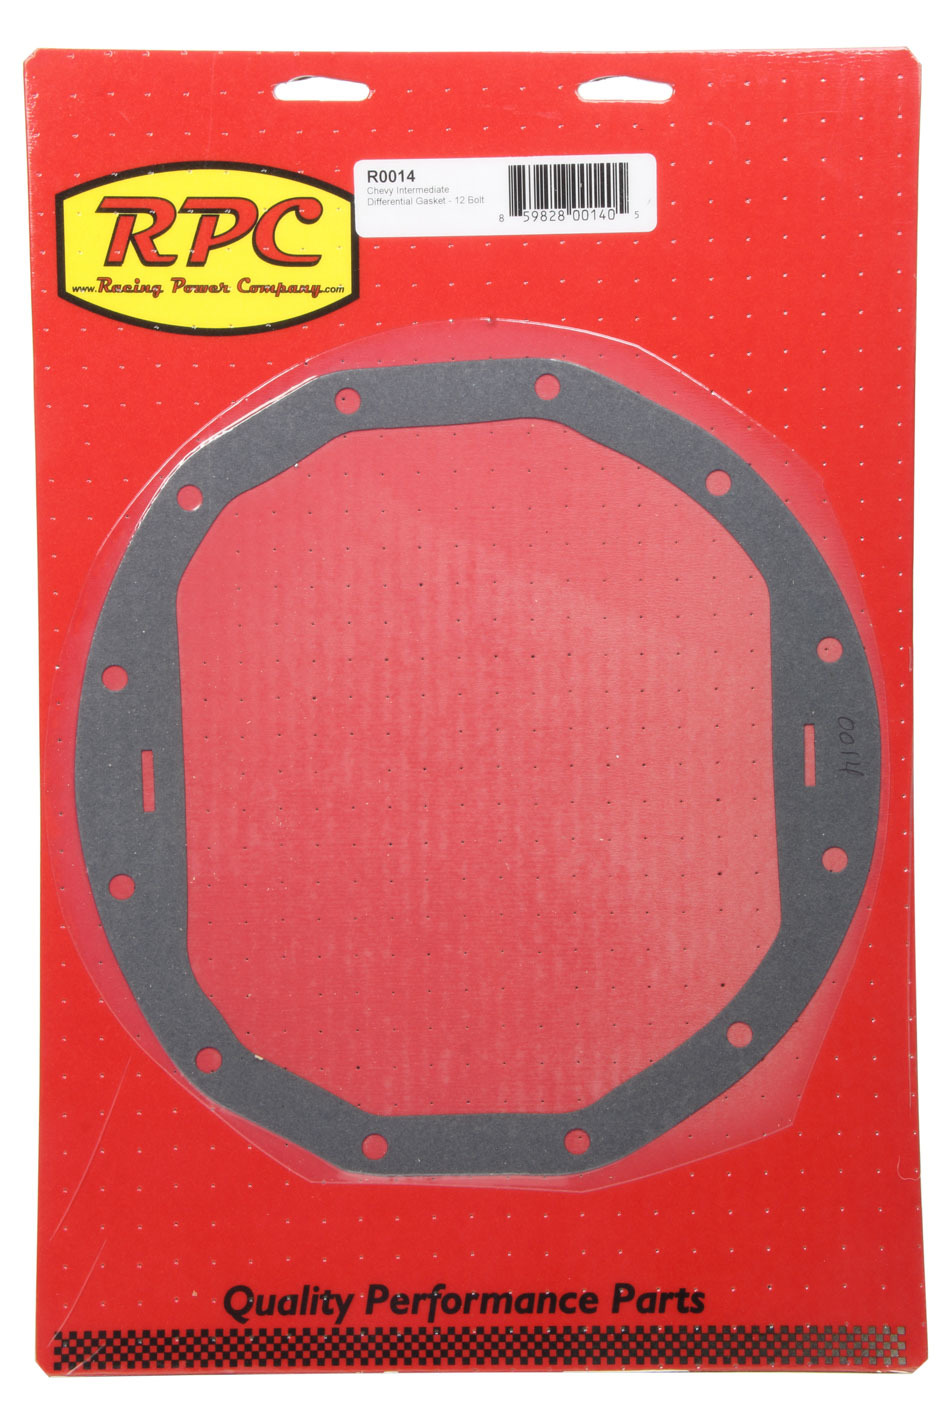 Chevy Intermediate Diff Cover Gasket 12 Bolt - R0014